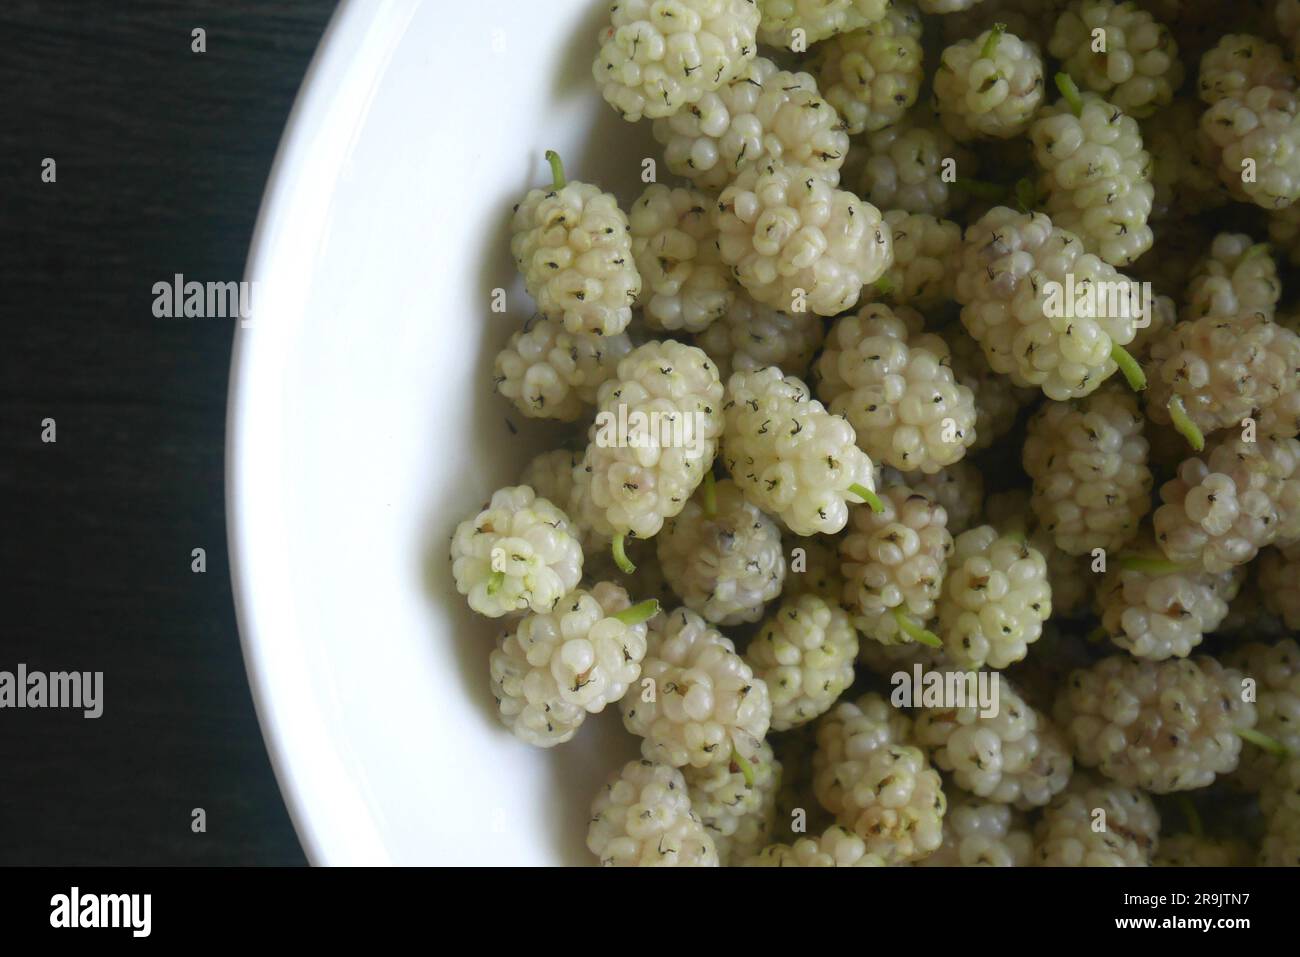 White mulberries, Morus Alba, in a white bowl on a table Stock Photo